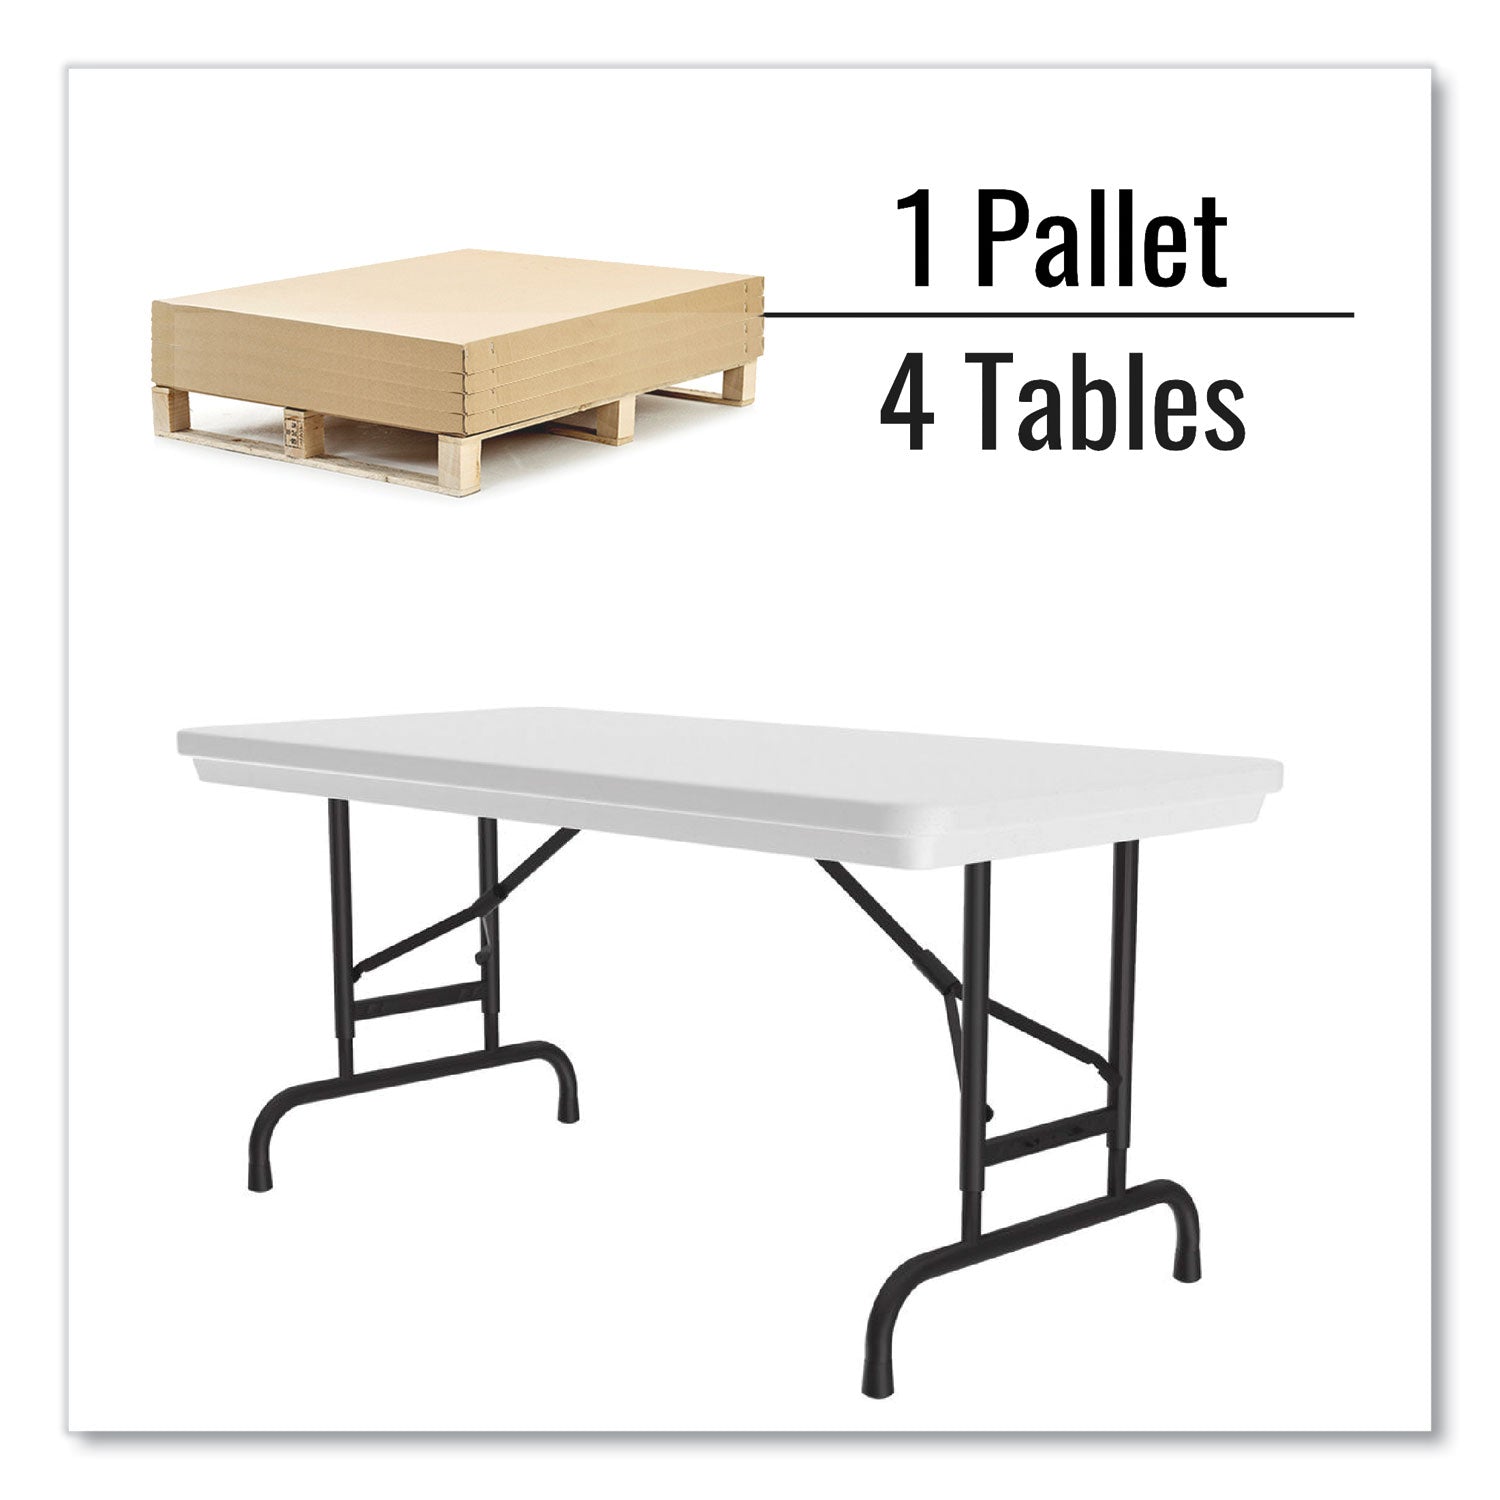 adjustable-folding-table-rectangular-48-x-24-x-22-to-32-gray-top-black-legs-4-pallet-ships-in-4-6-business-days_crlra2448234p - 3